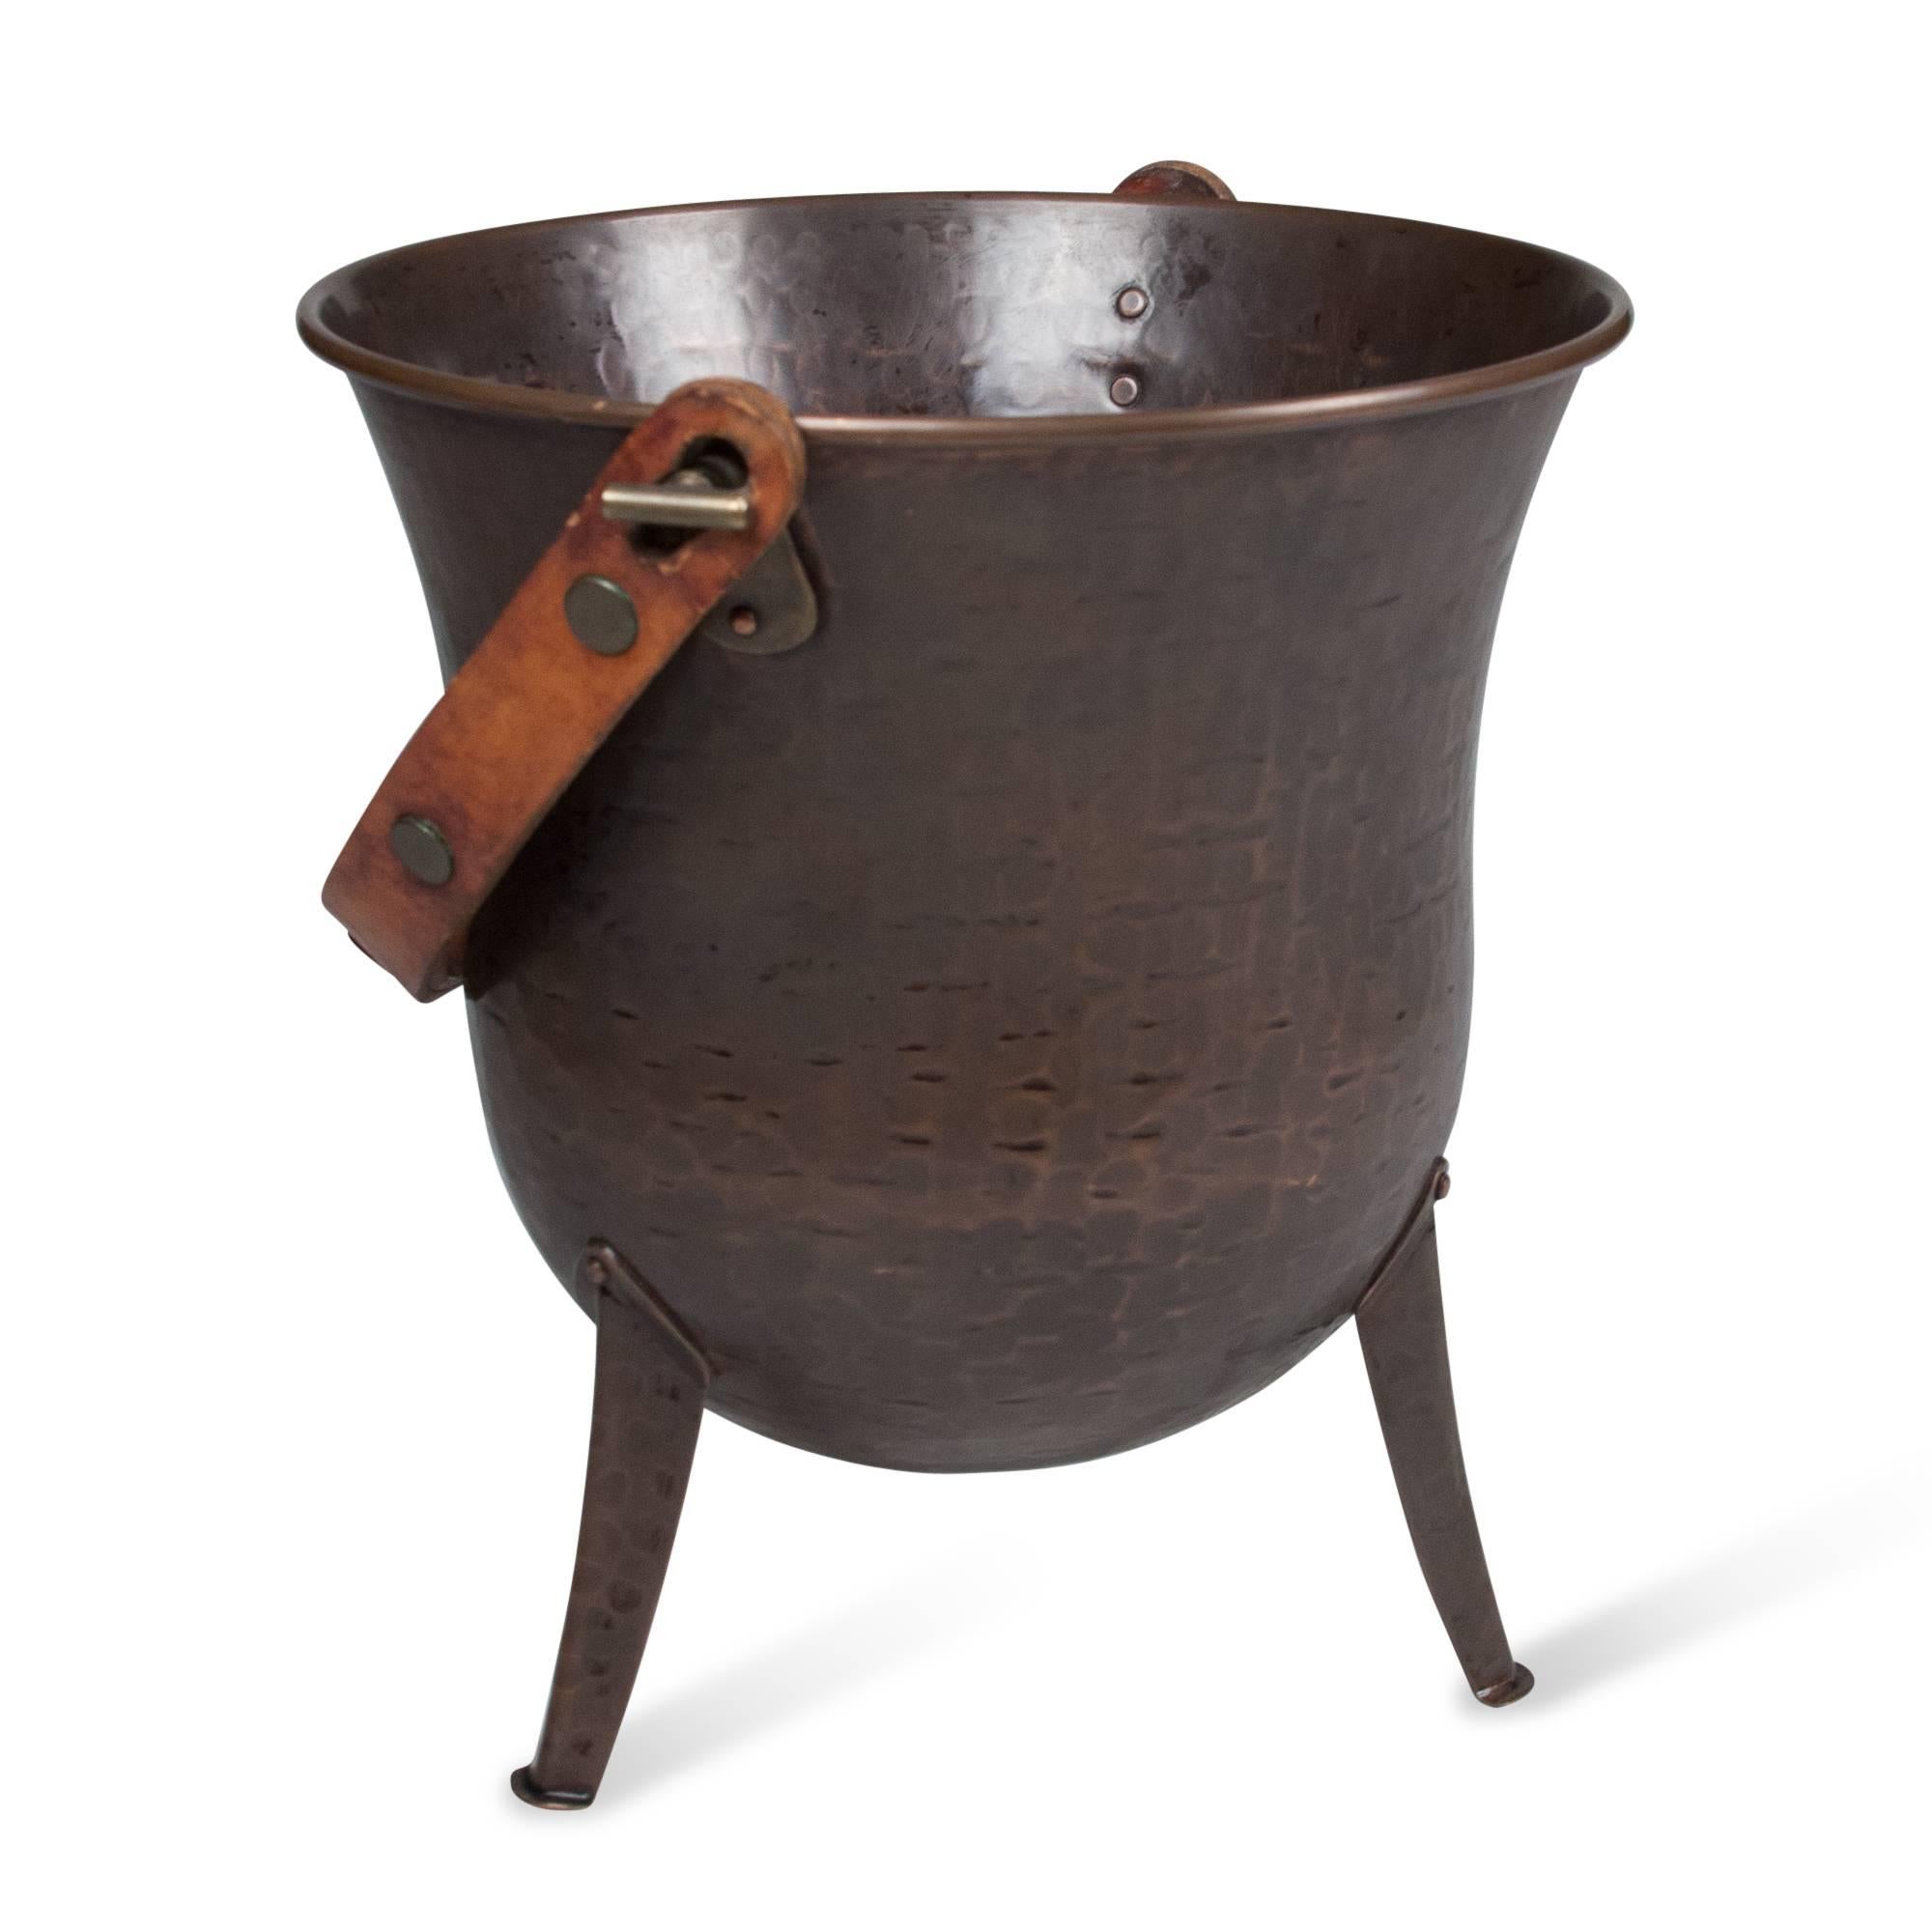 Textured and Patinated Copper Metal Bucket, German, 1930s 1